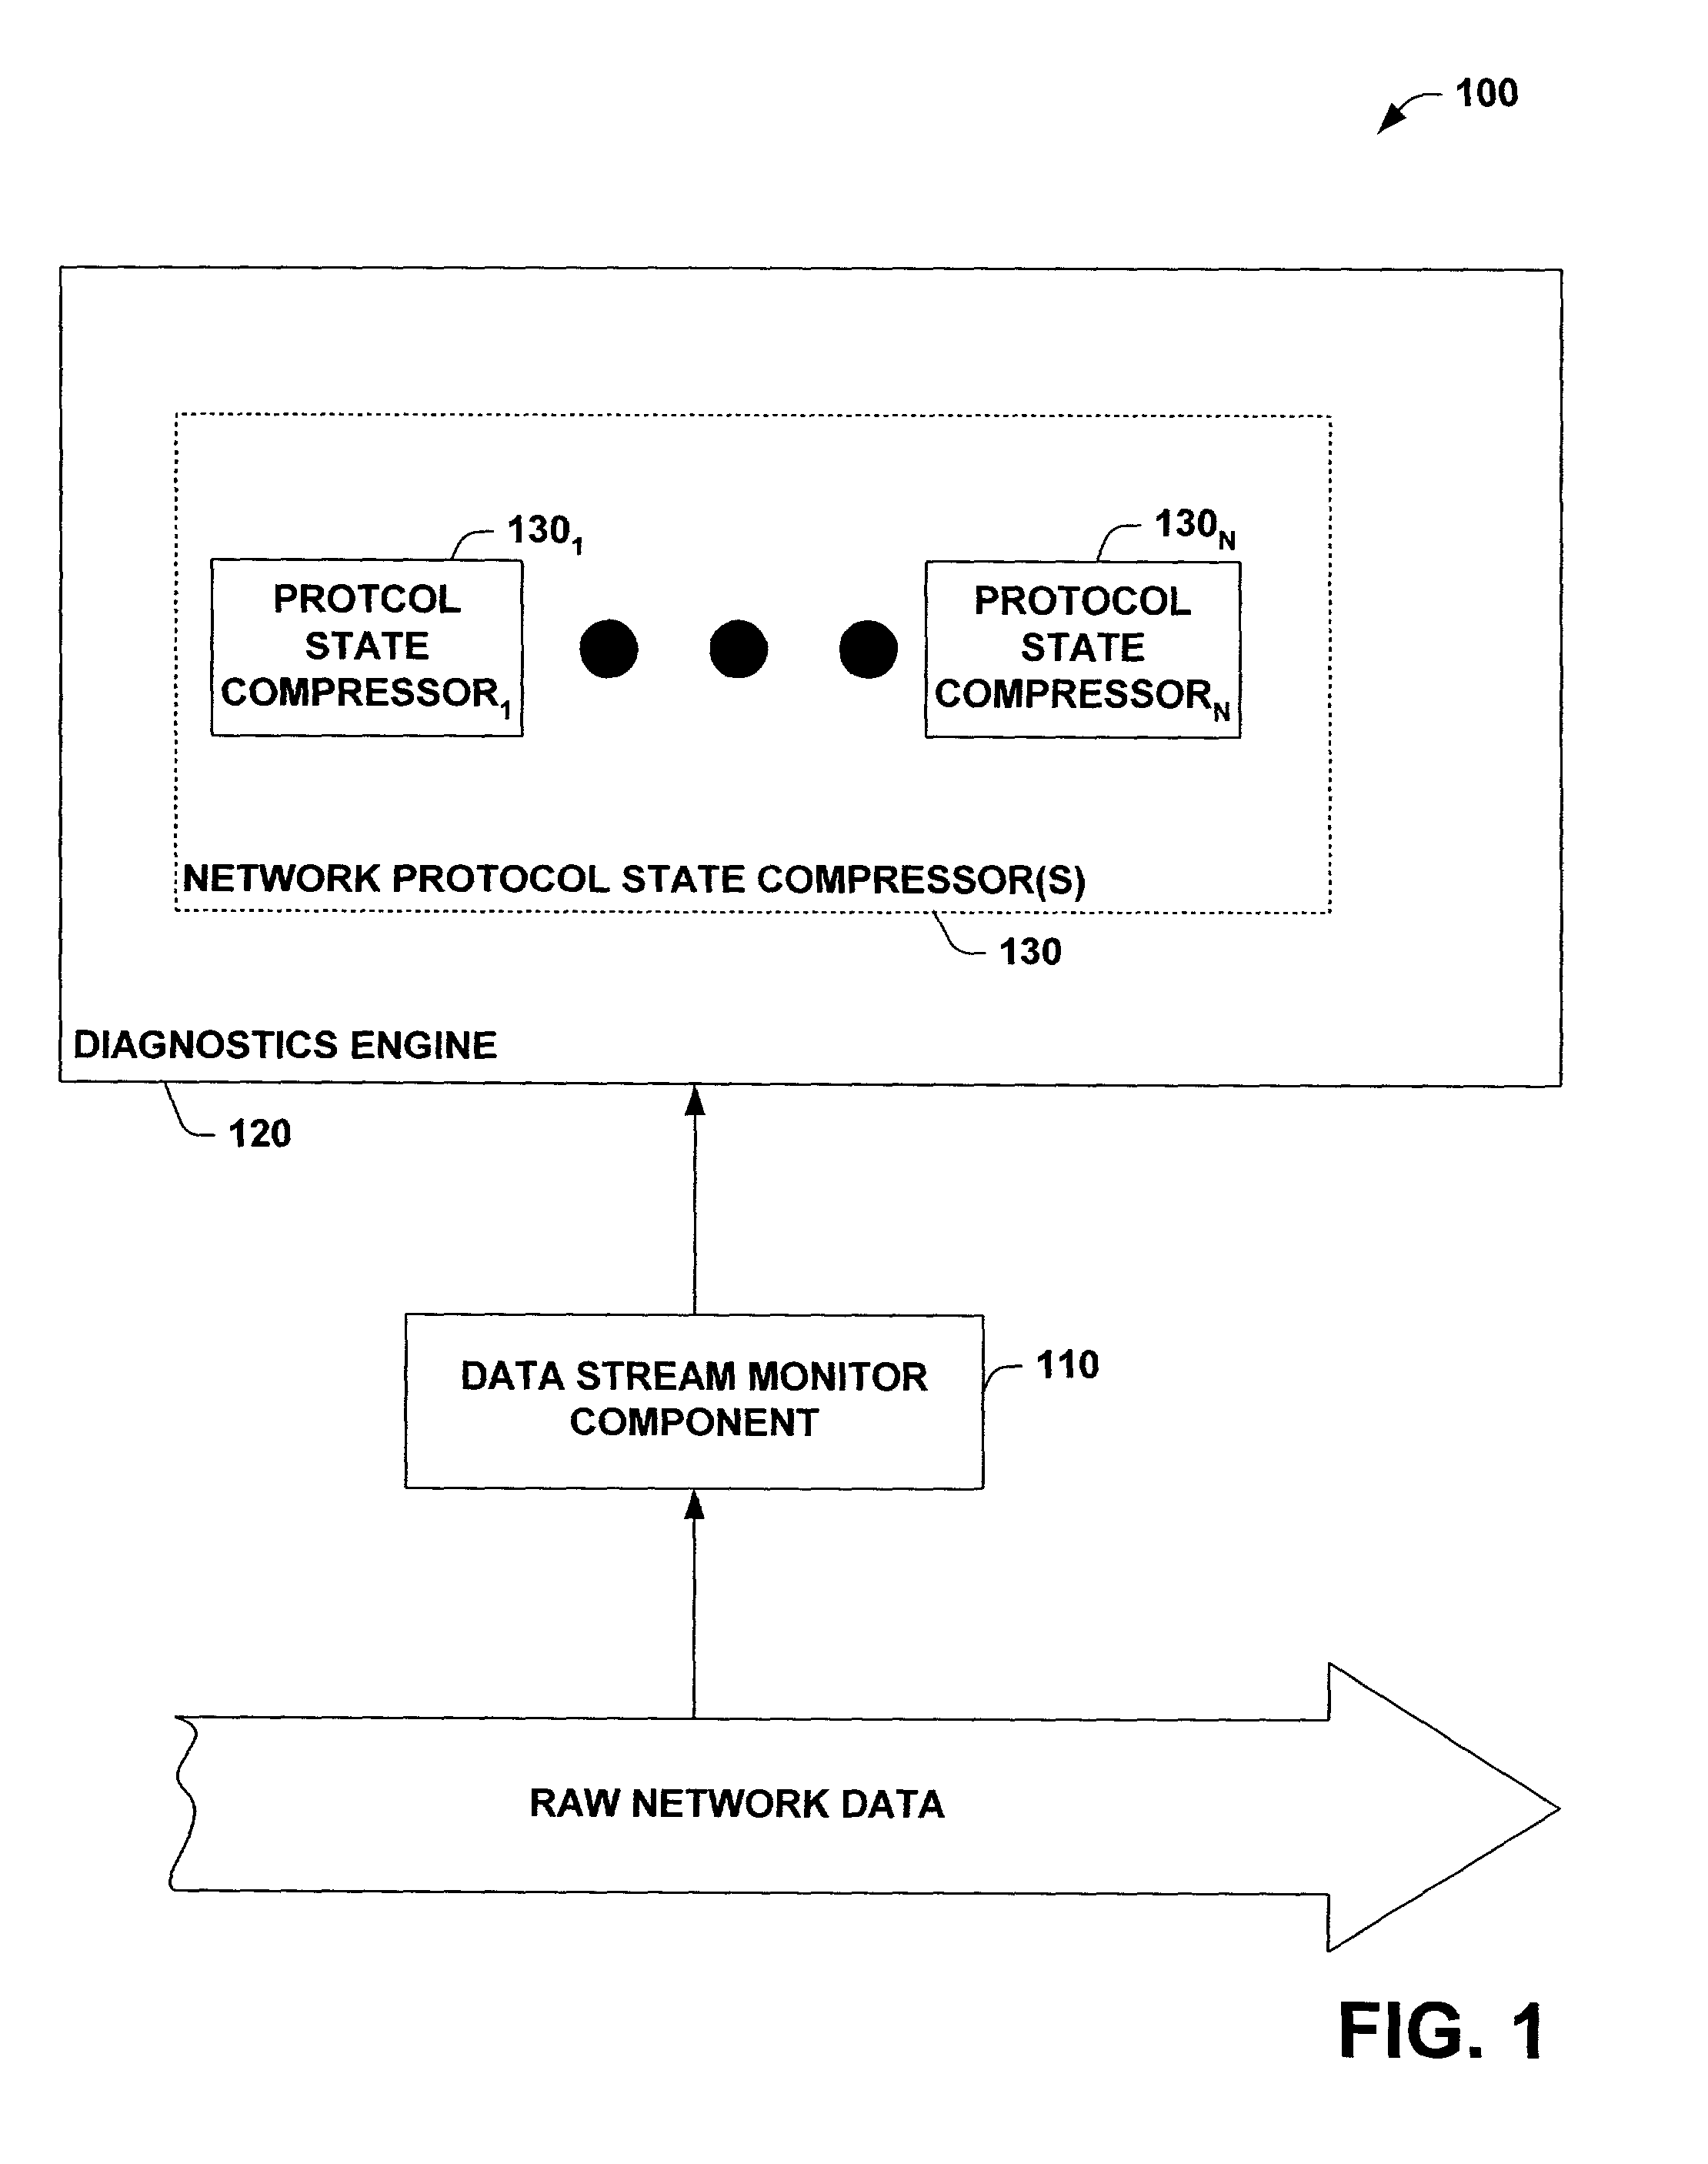 System and method facilitating network diagnostics and self-healing